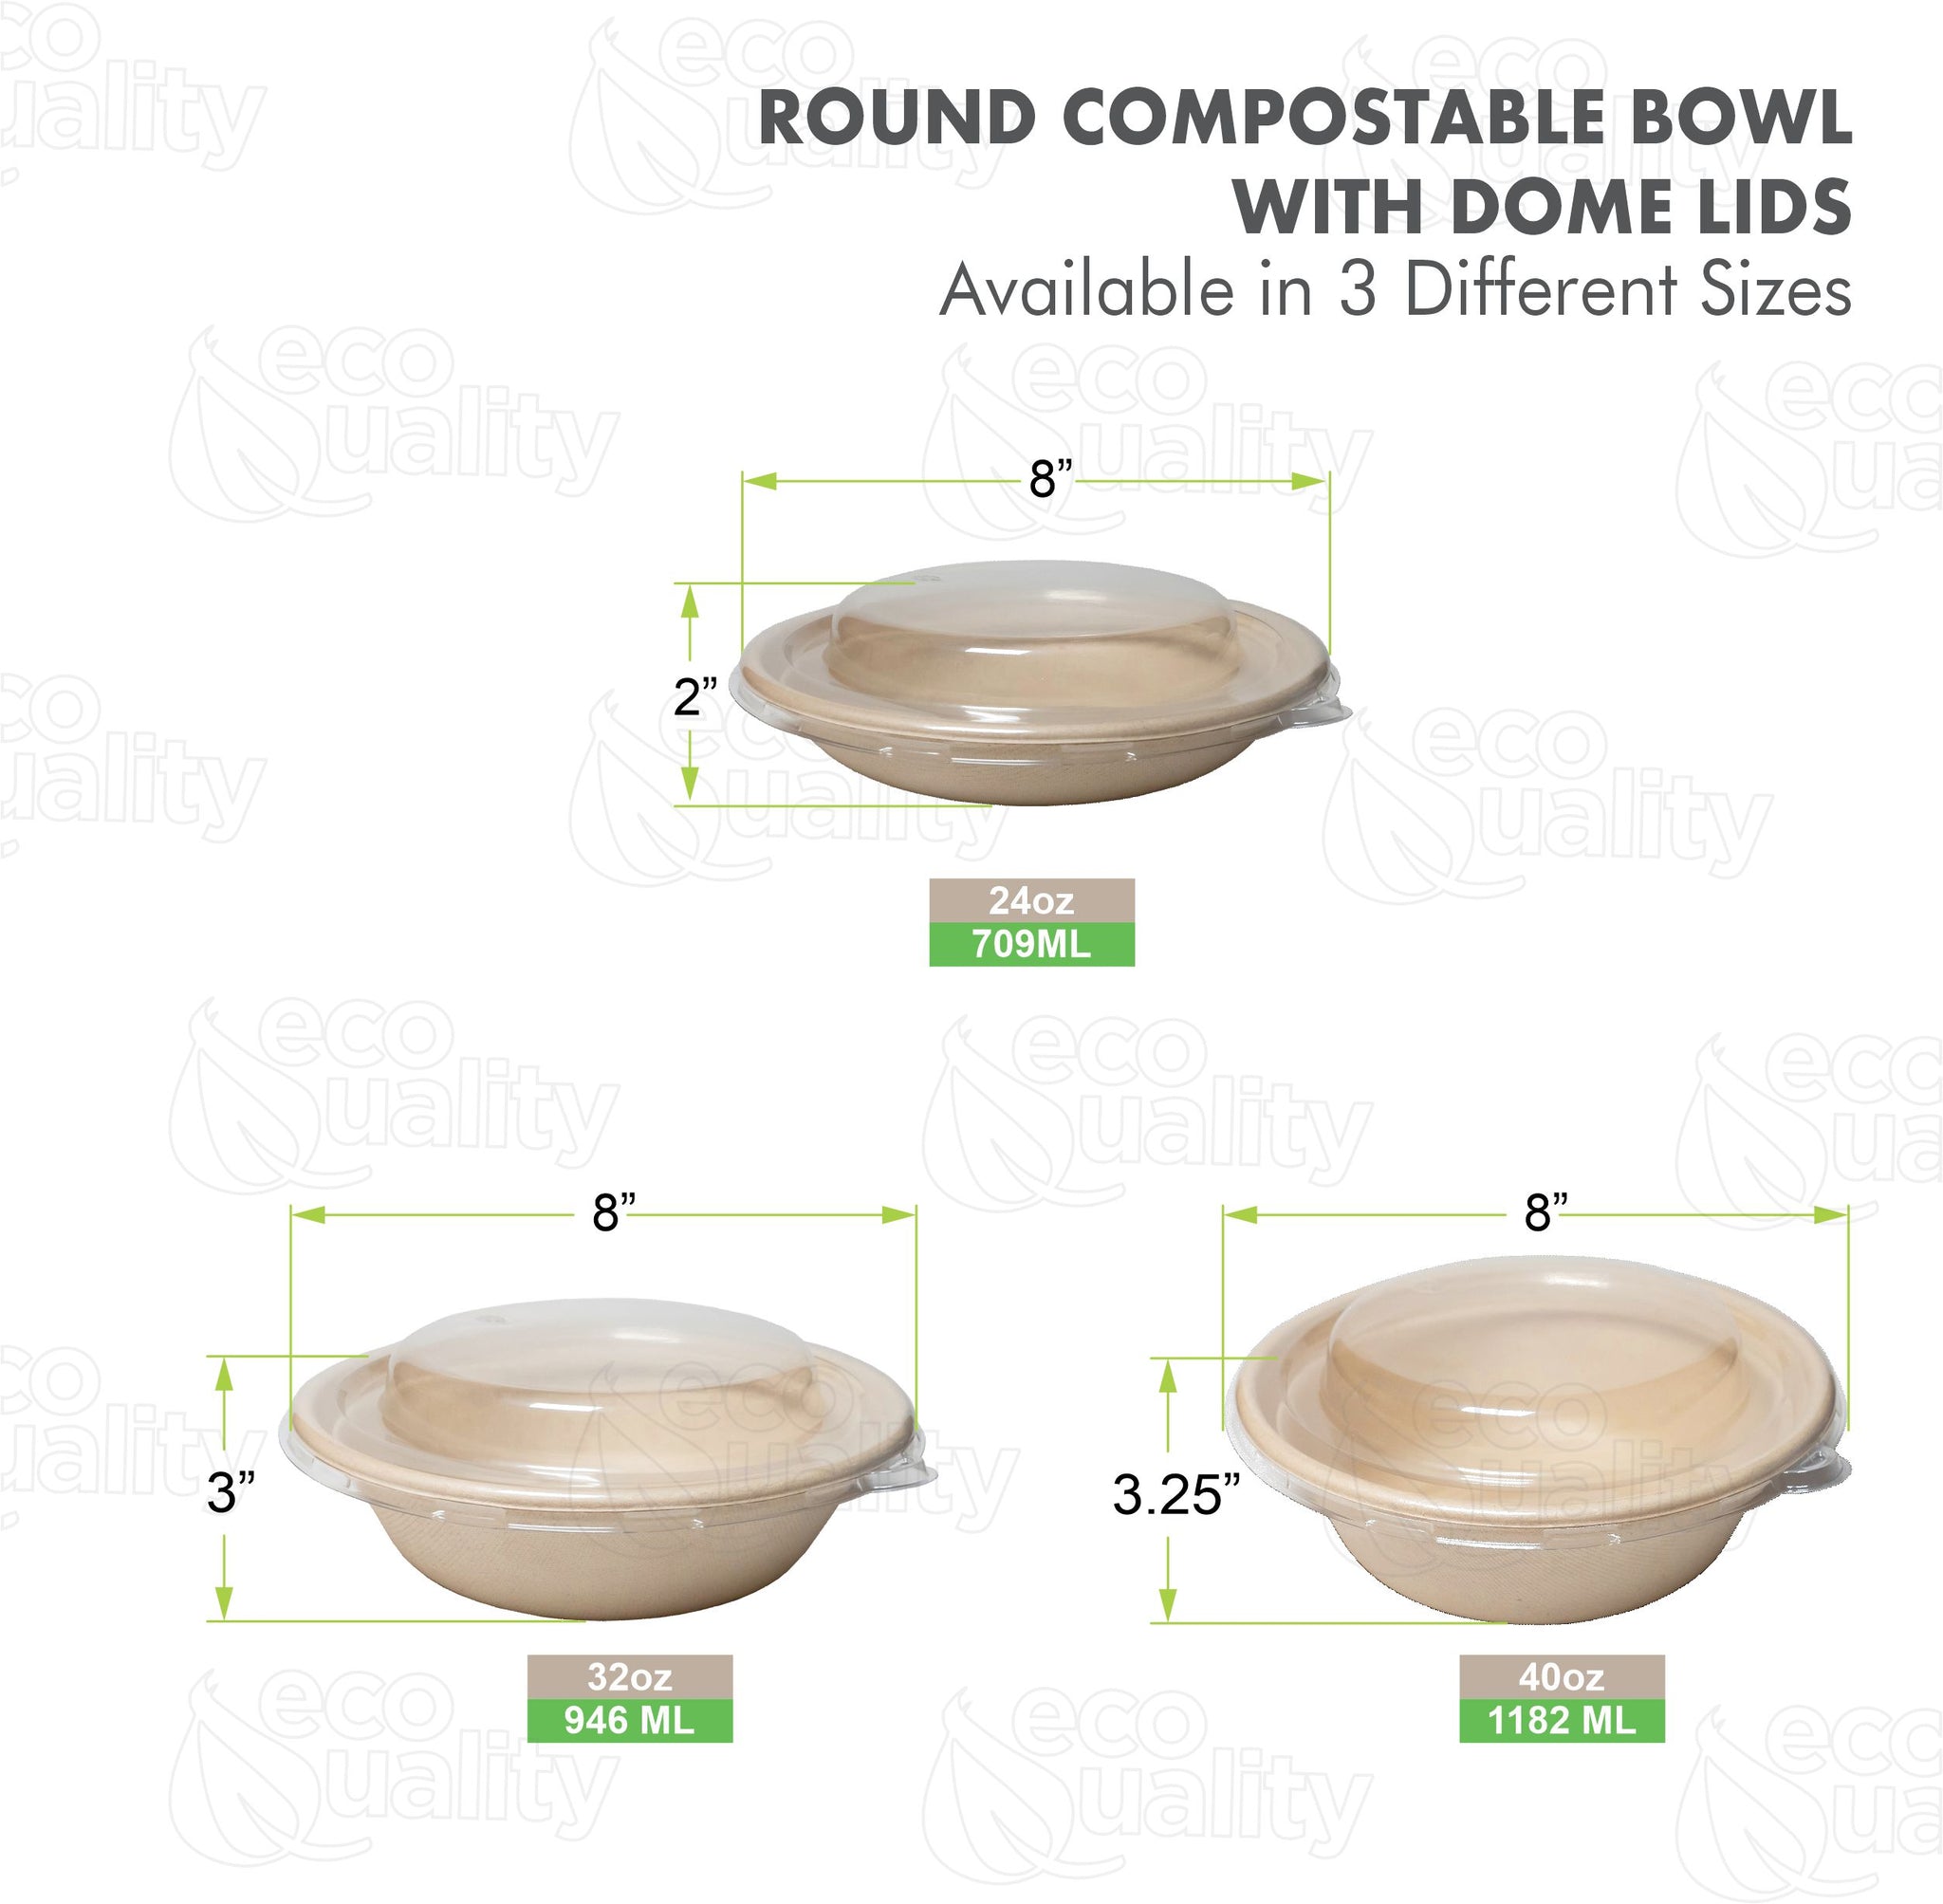 disposableproducts Microwavesafe LeakResistant bowl soupbowl Biodegradable Bowls sugarcane bowl ice cream bowl disposable bowl heavyduty bowl cereal bowl 24ounces 24oz pokebowl 16 ounces 16oz 32oz 32 ounces 40oz 40 ounces dinner lunch bowl catering rice burrito bowl with dome lid